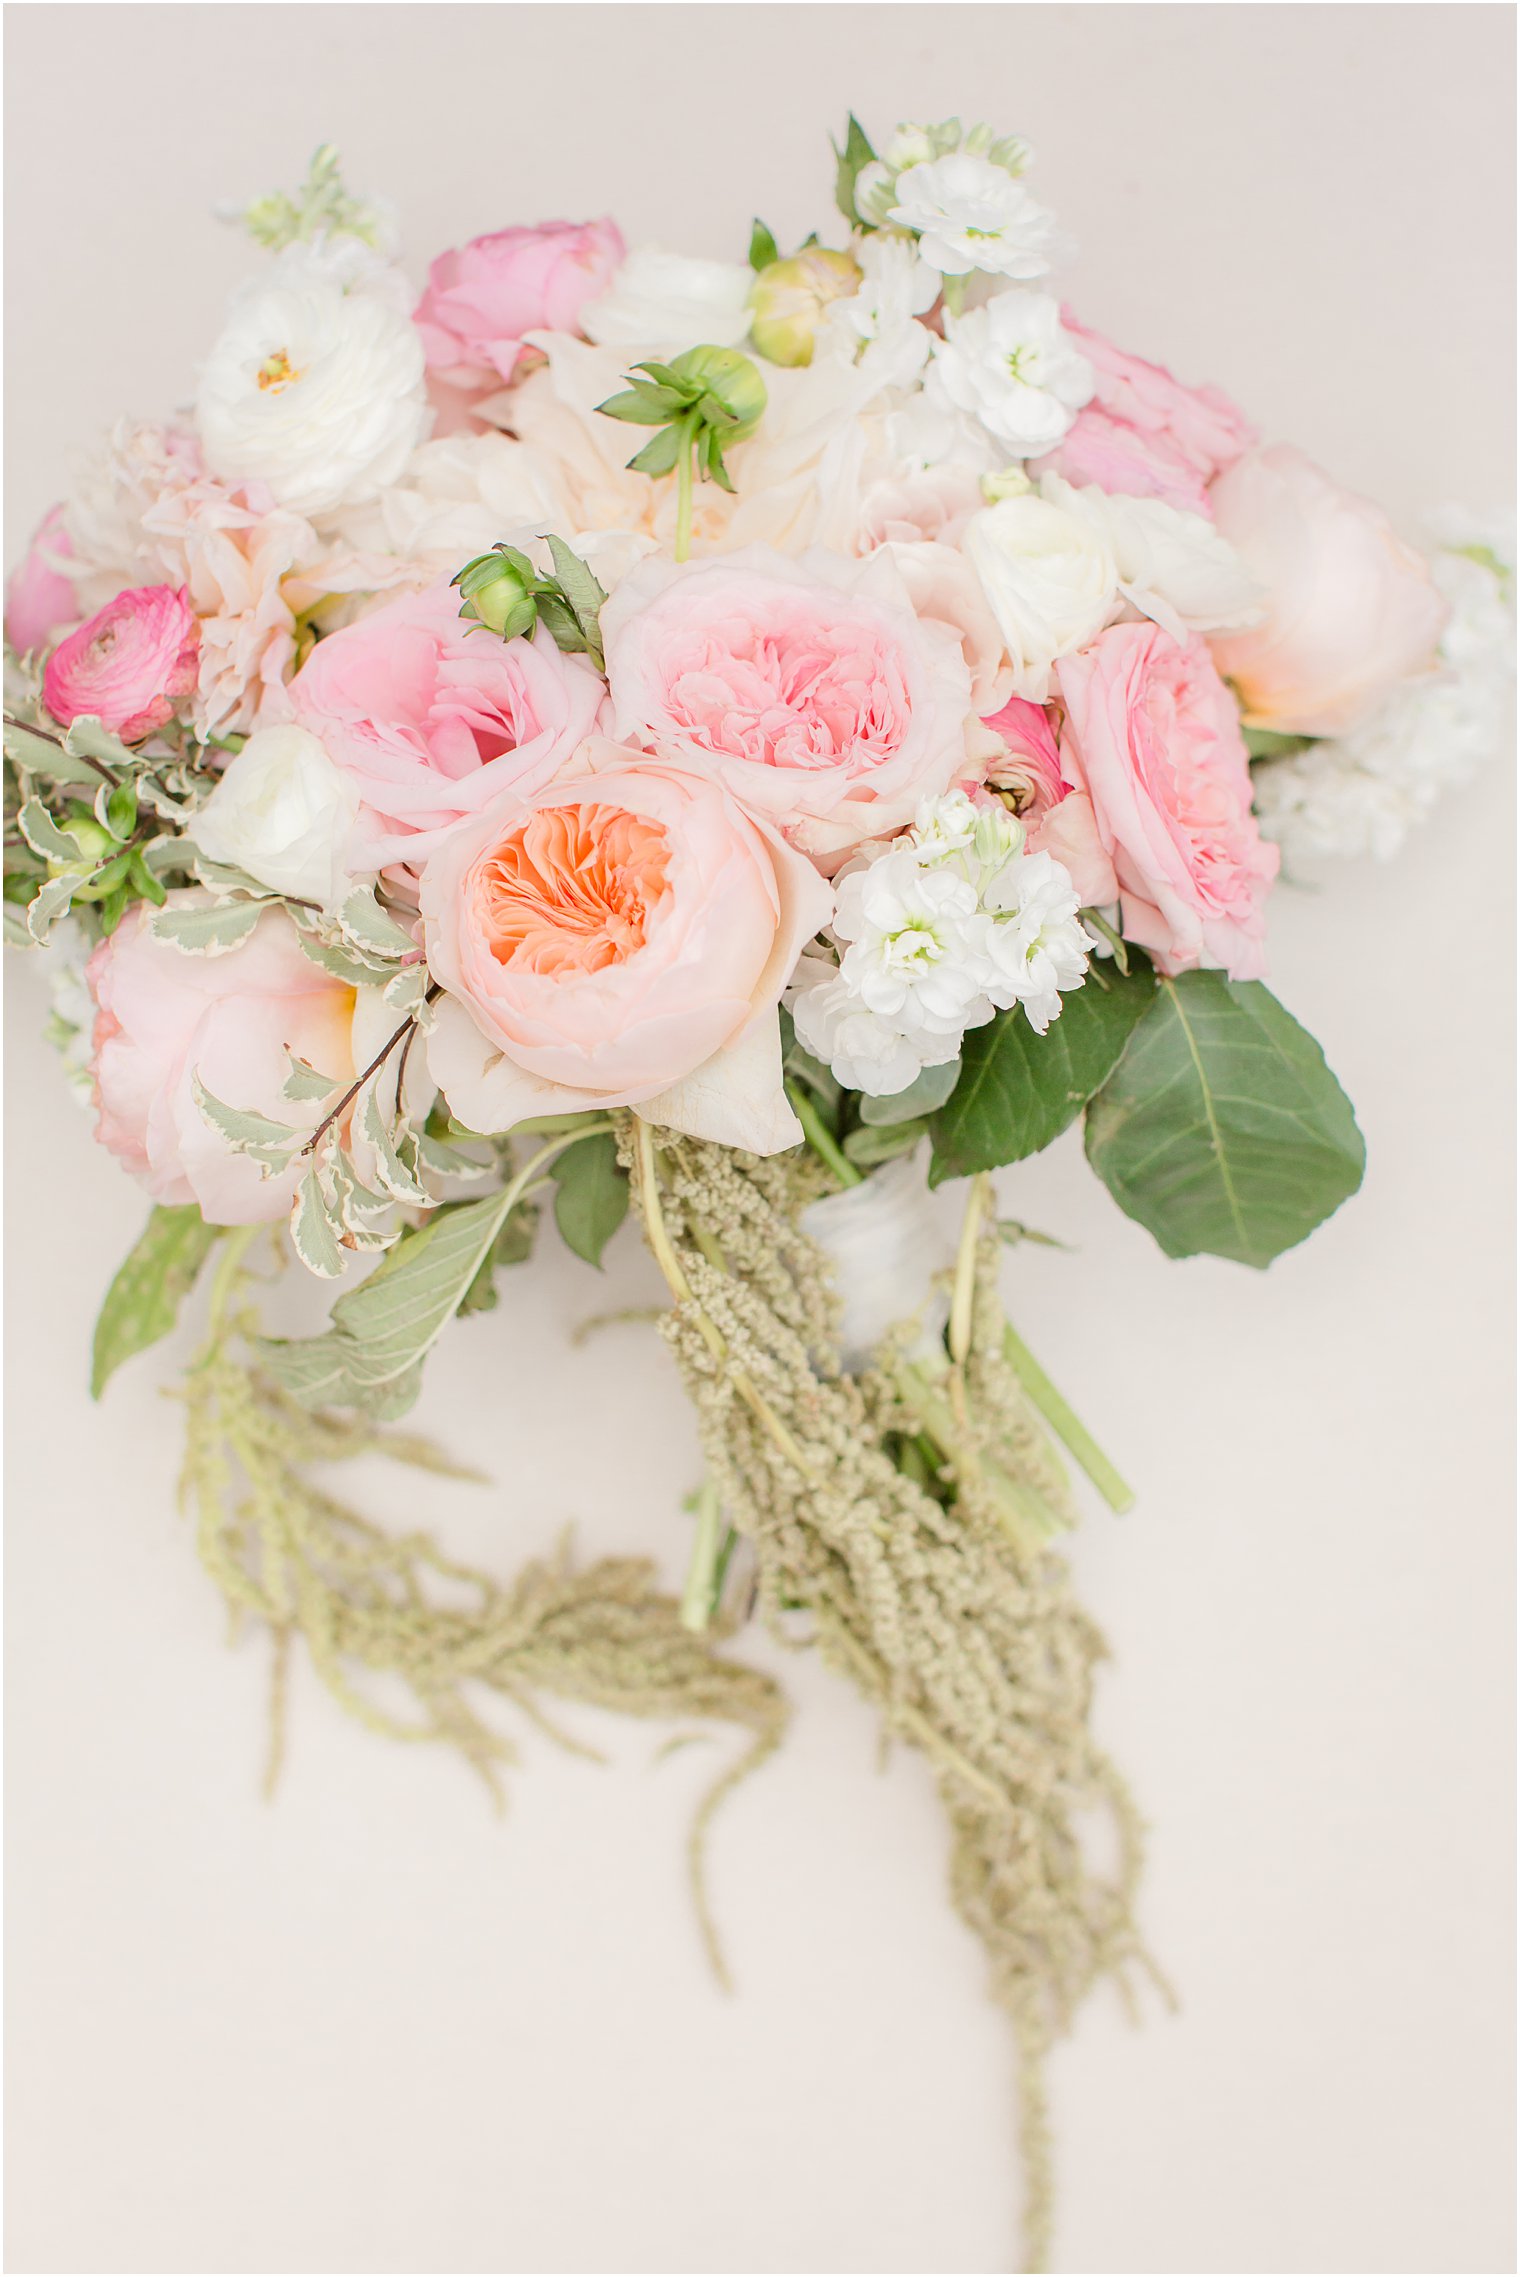 Bridal bouquet by Peonies to Paintchips